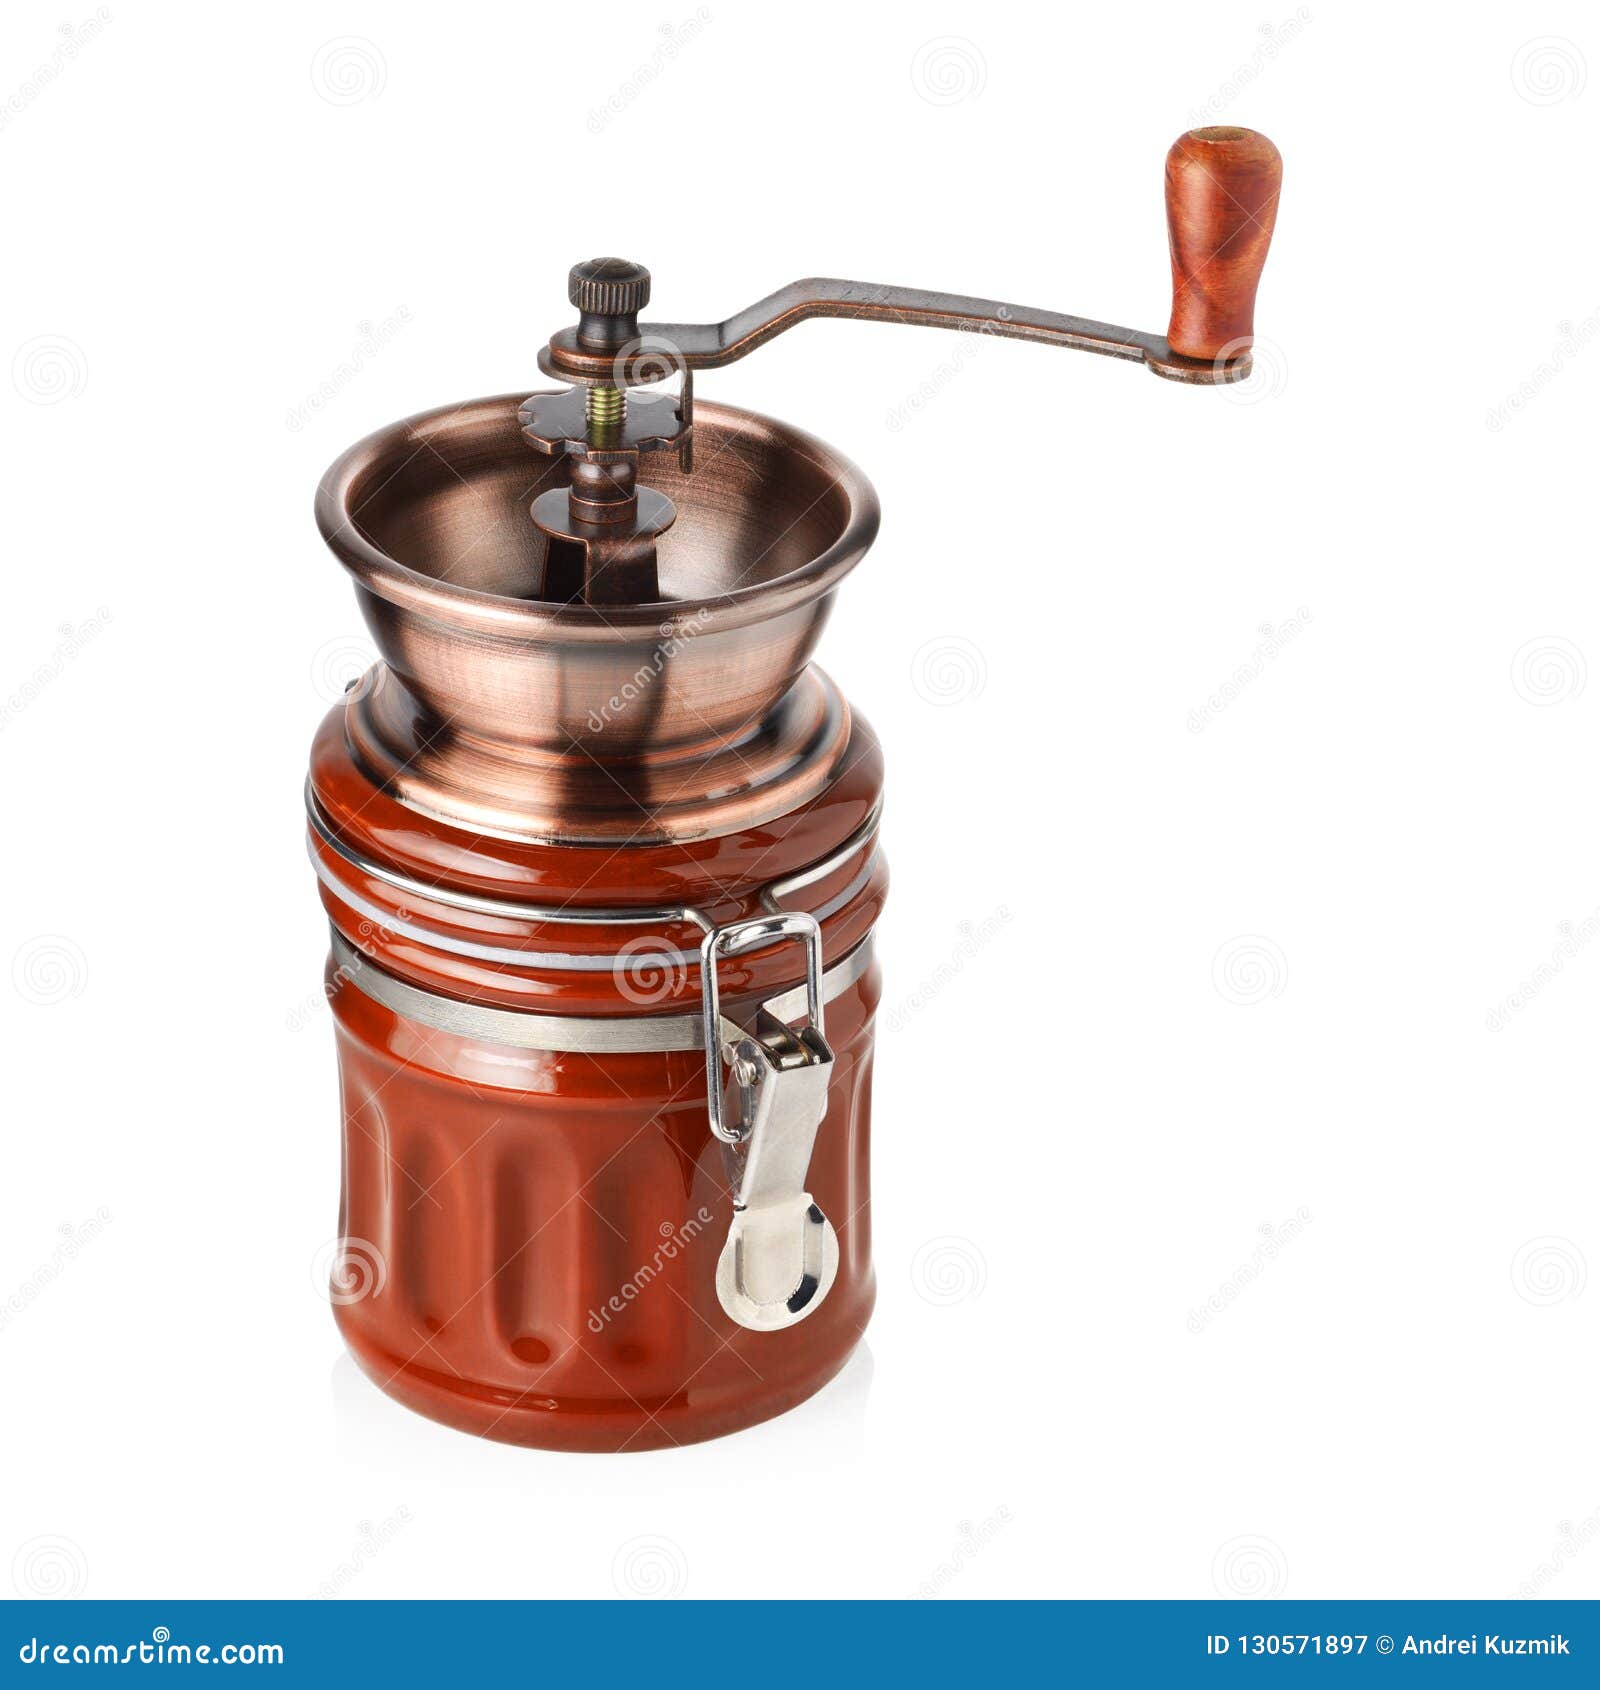 Old fashioned coffee grinder